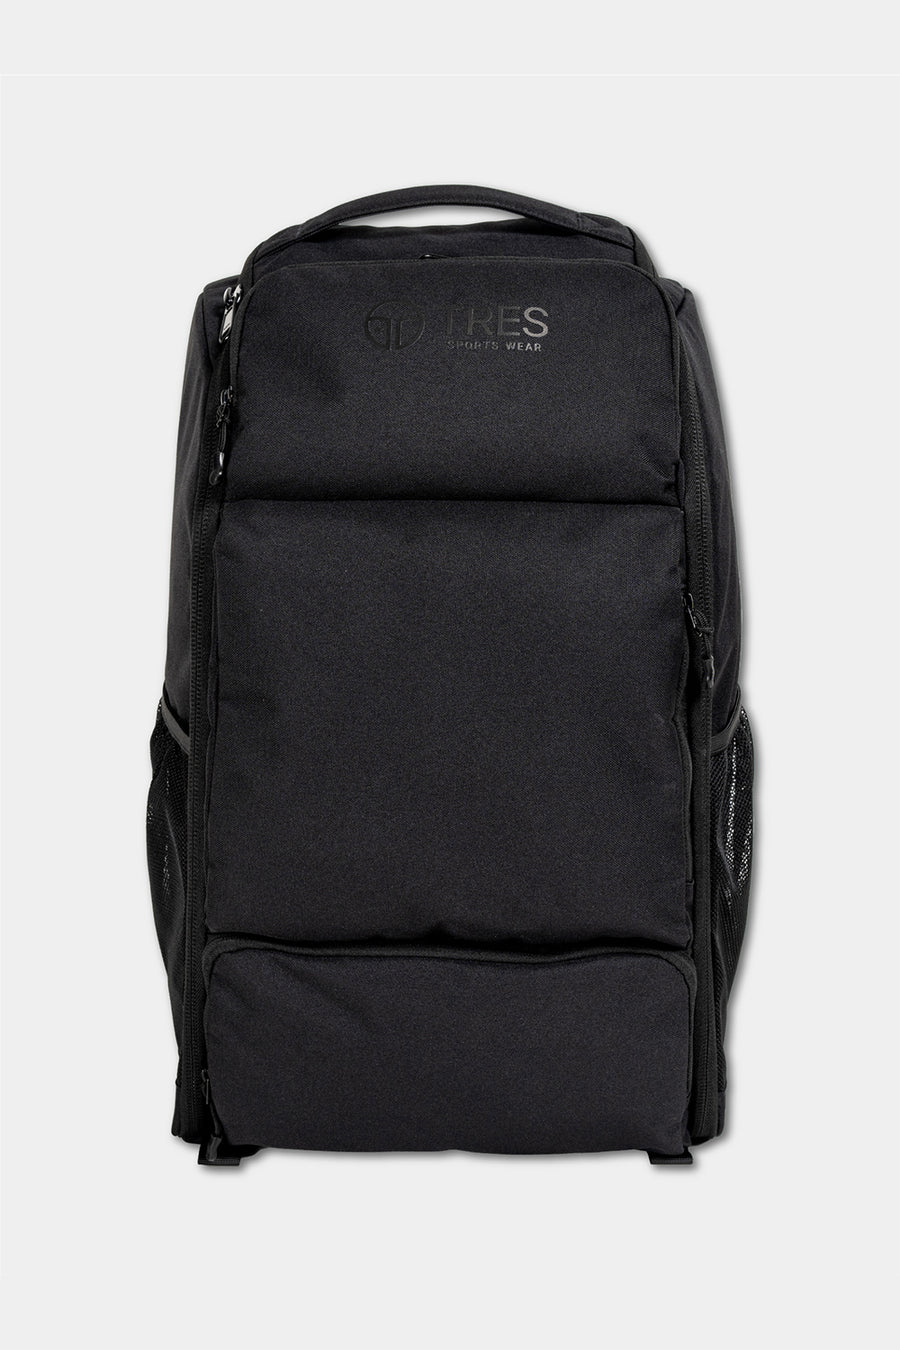 TRES Backpack 4.0